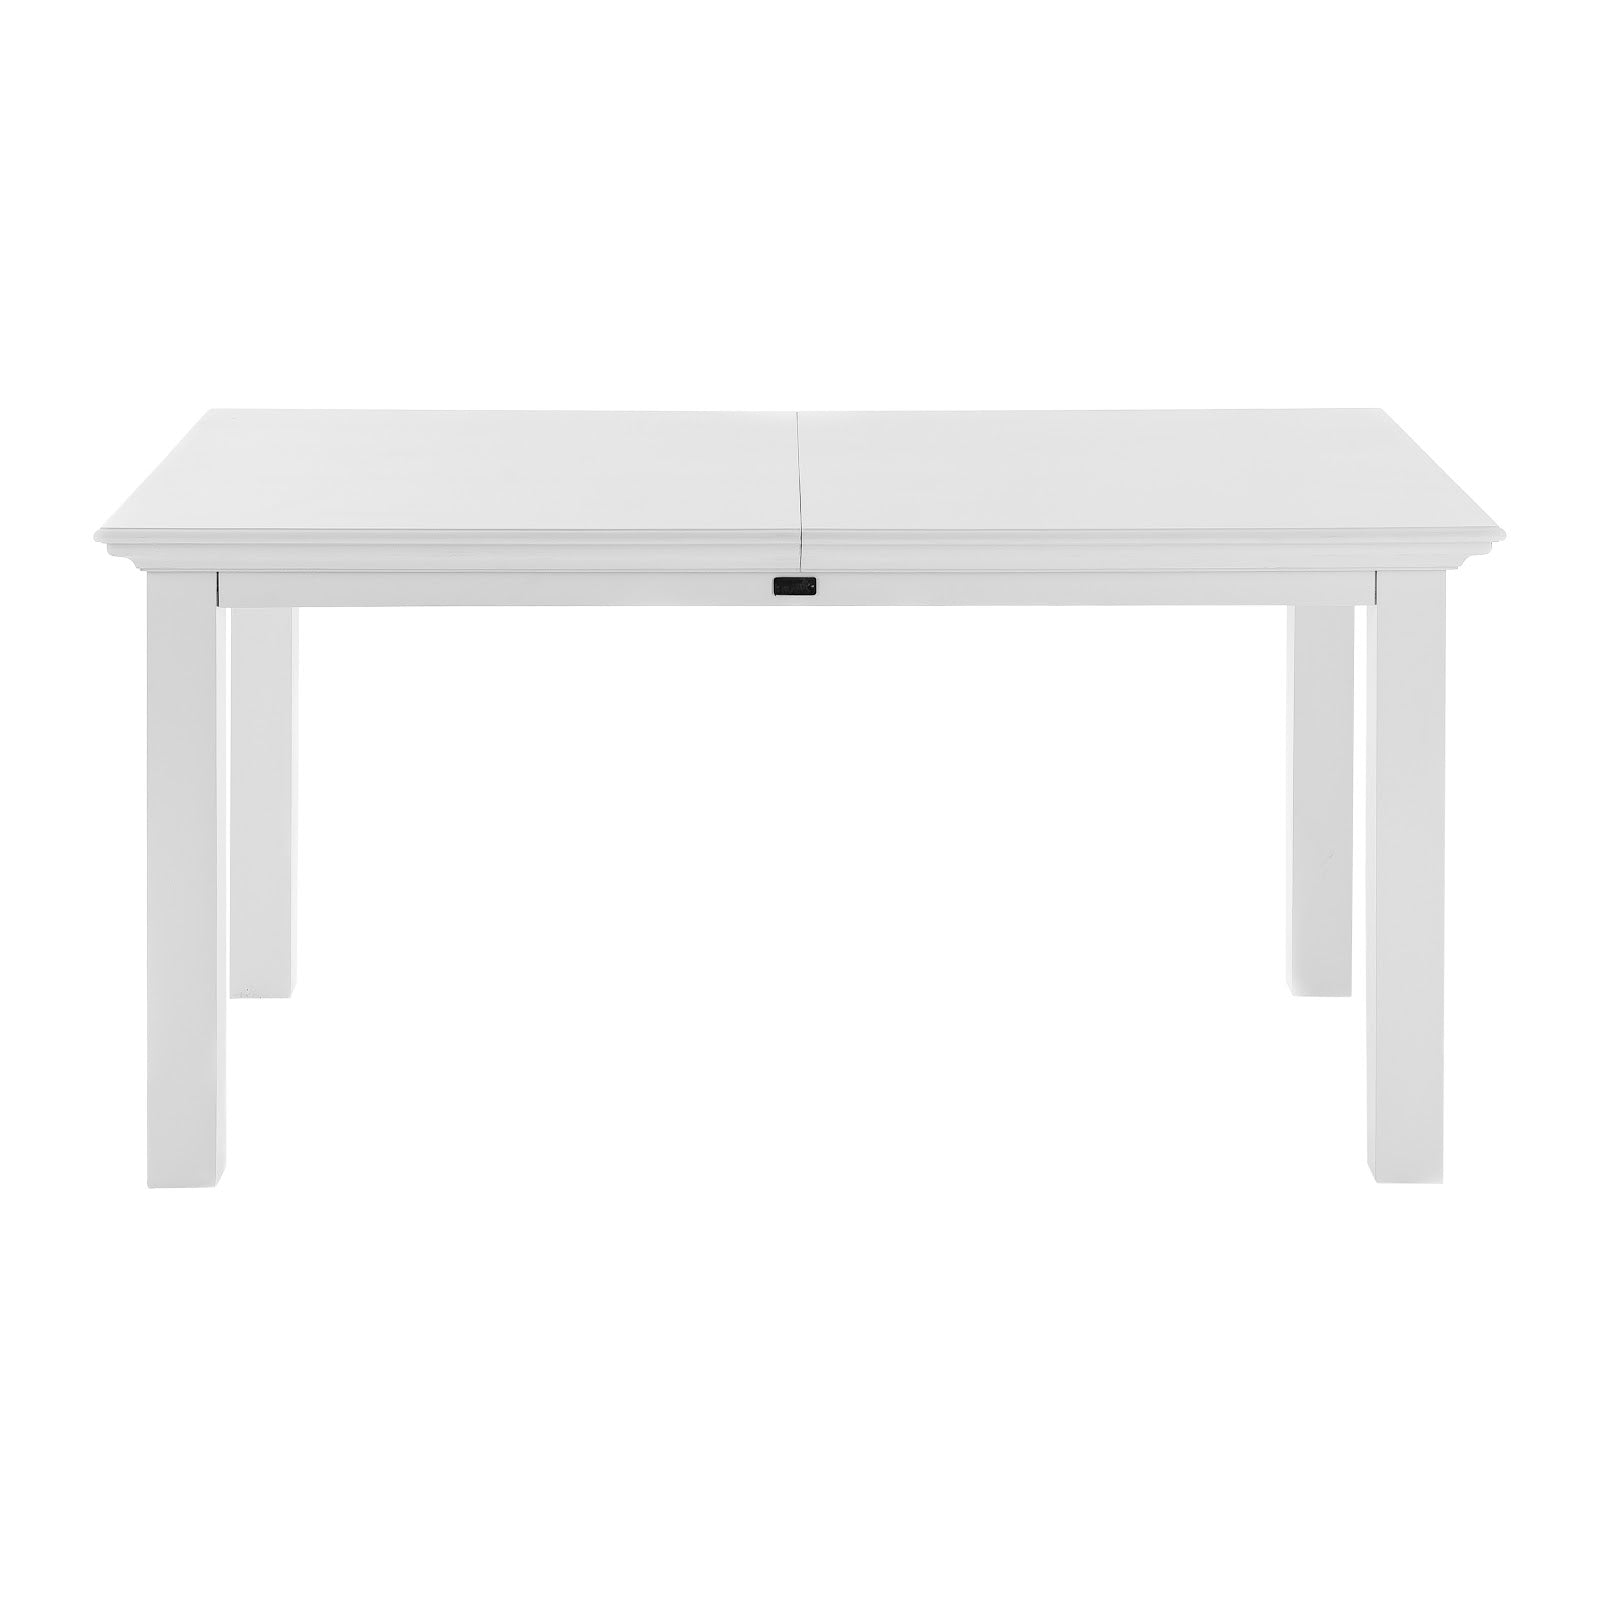 Dining Extension Table